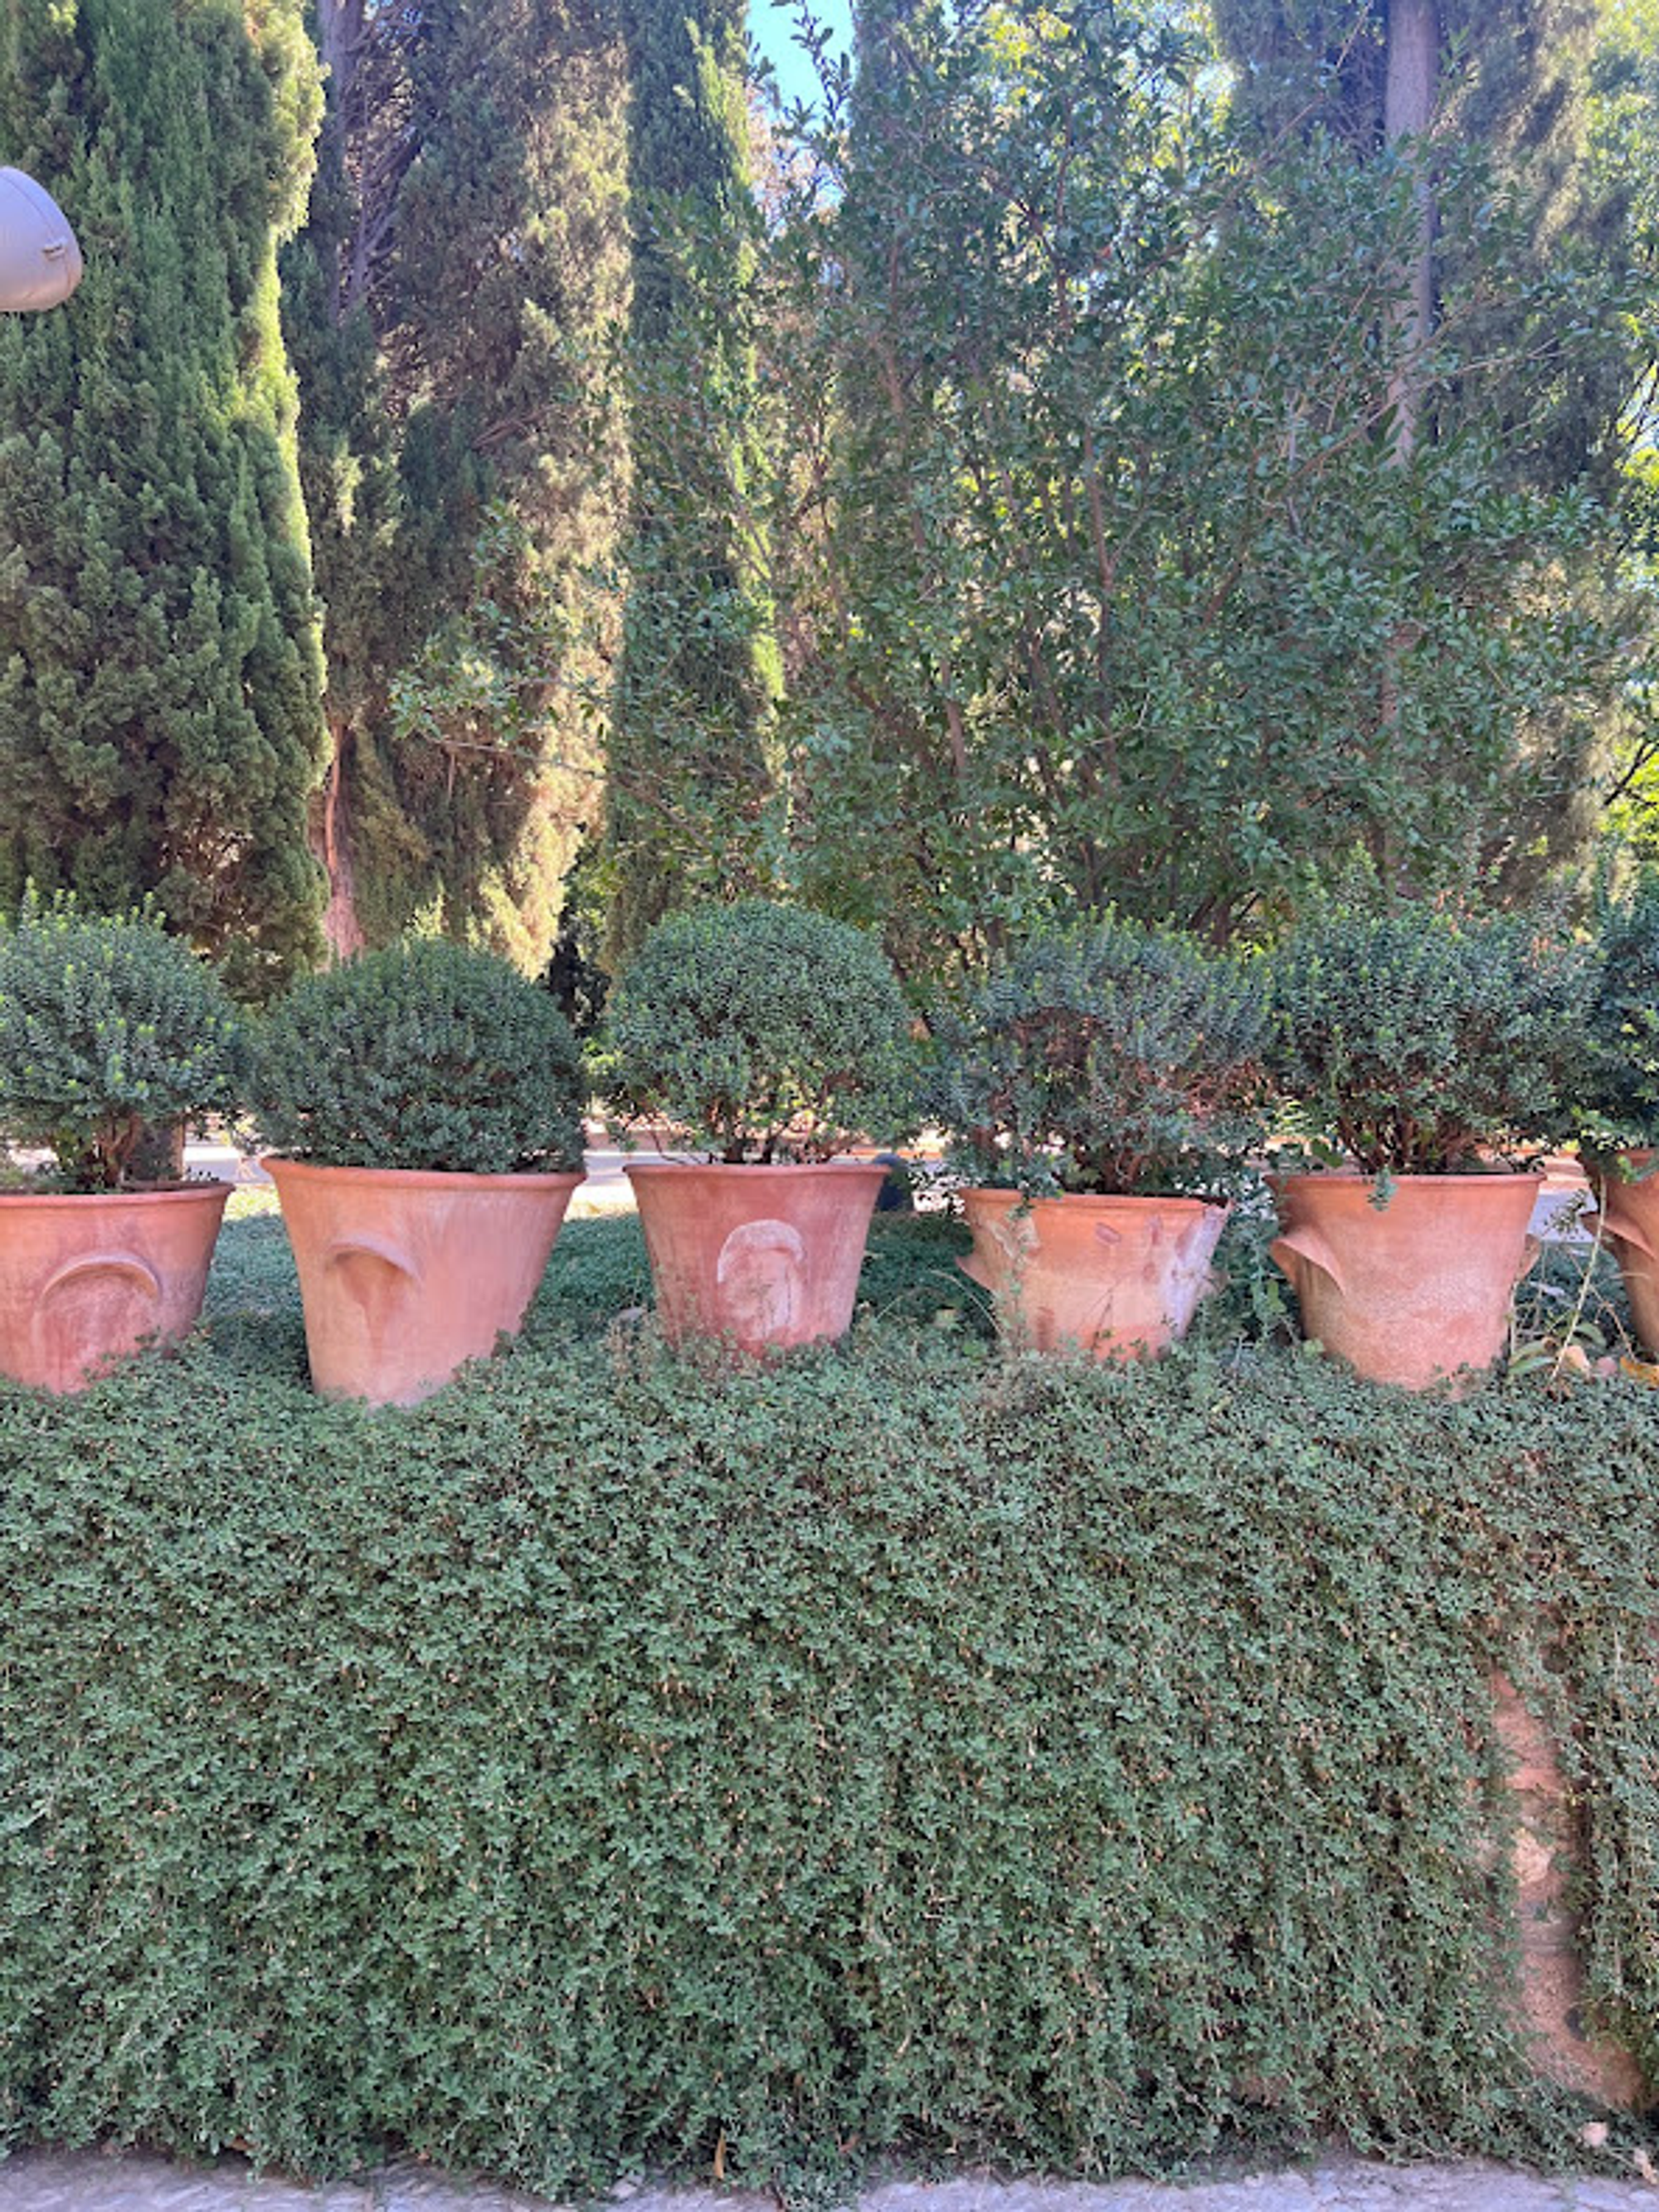 I’m really loving all the rows of pots everywhere